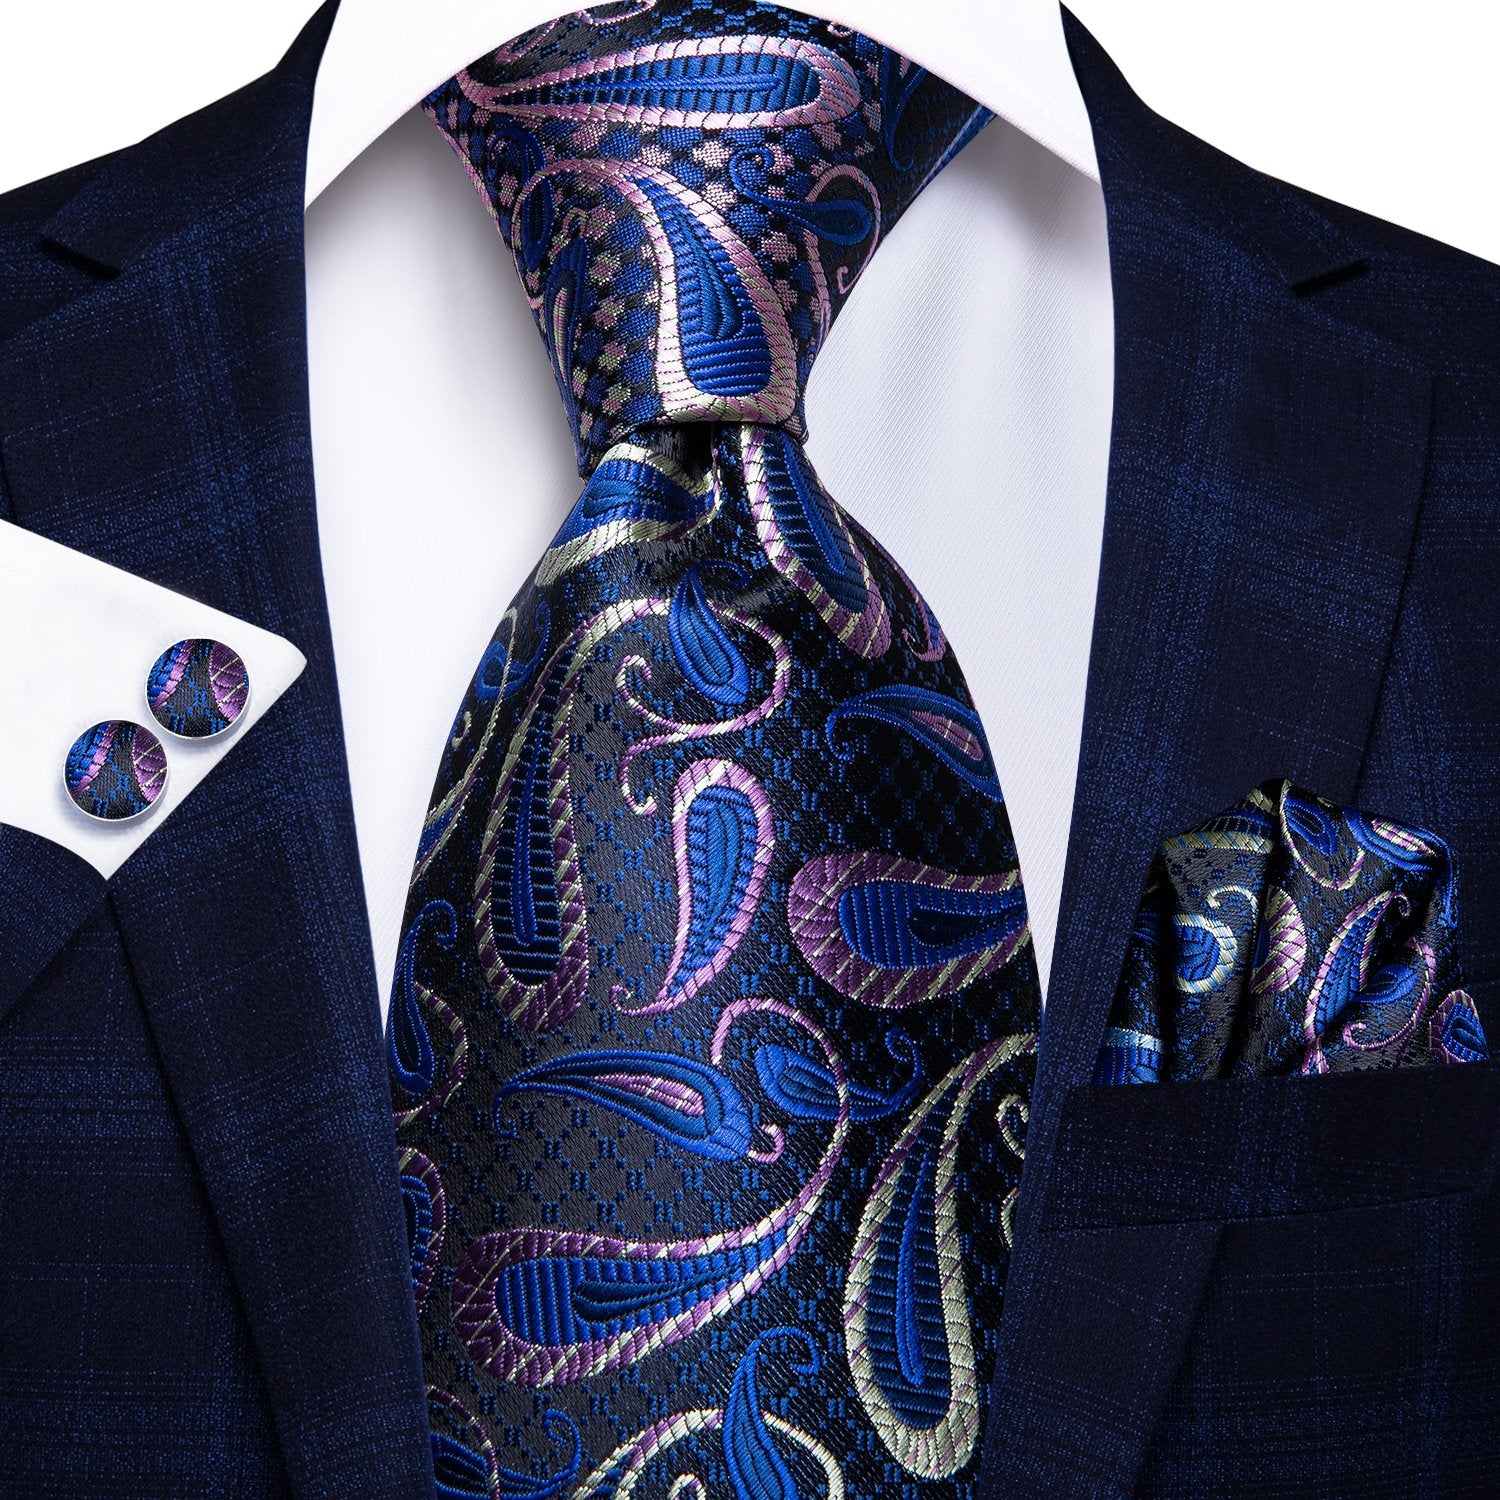 Blue Paisley Necktie Pocket Square Cufflinks Set with Collar Pin